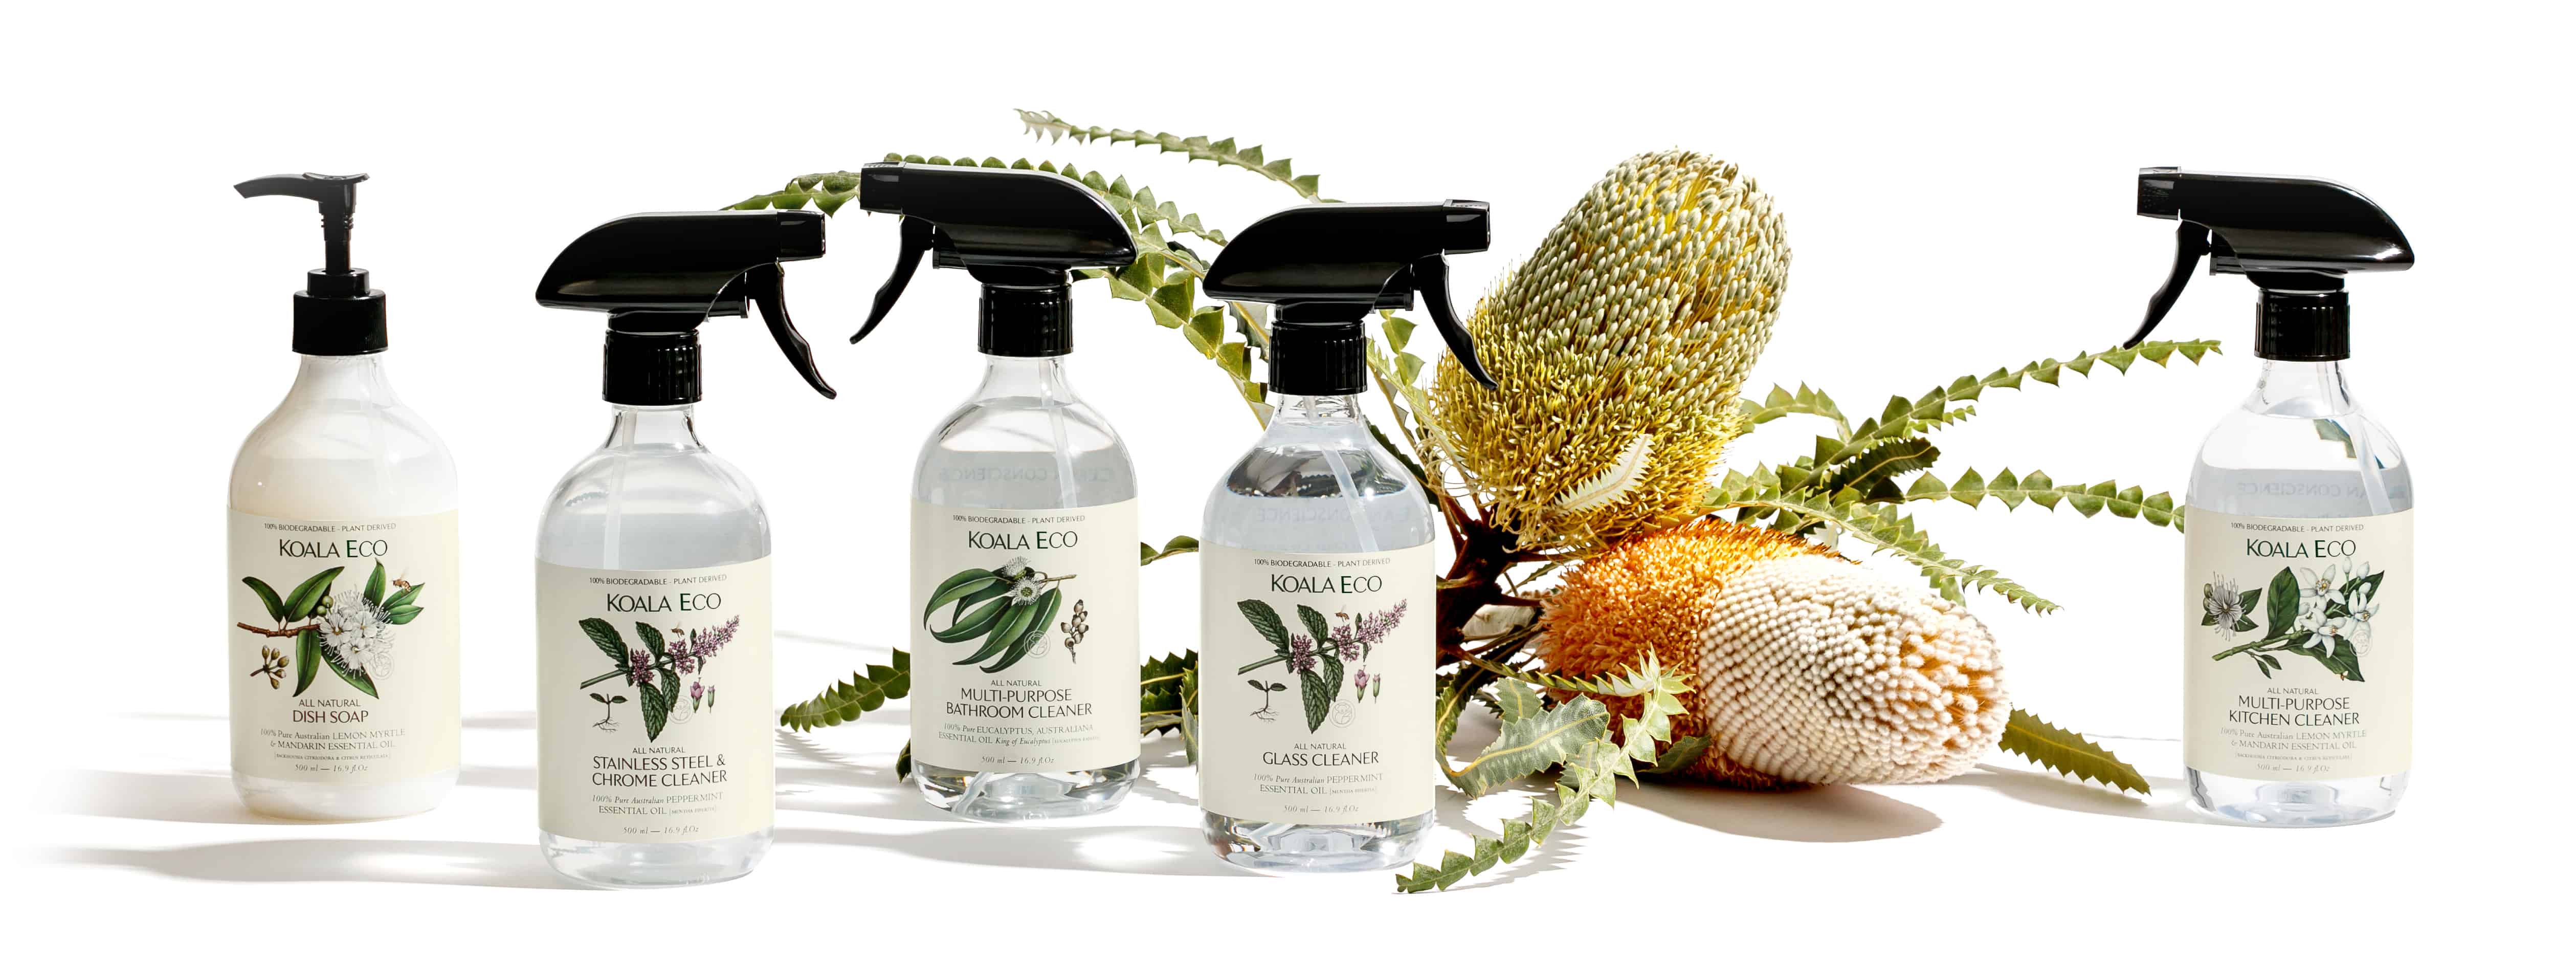 Collection of Koala Eco branded cleaning products